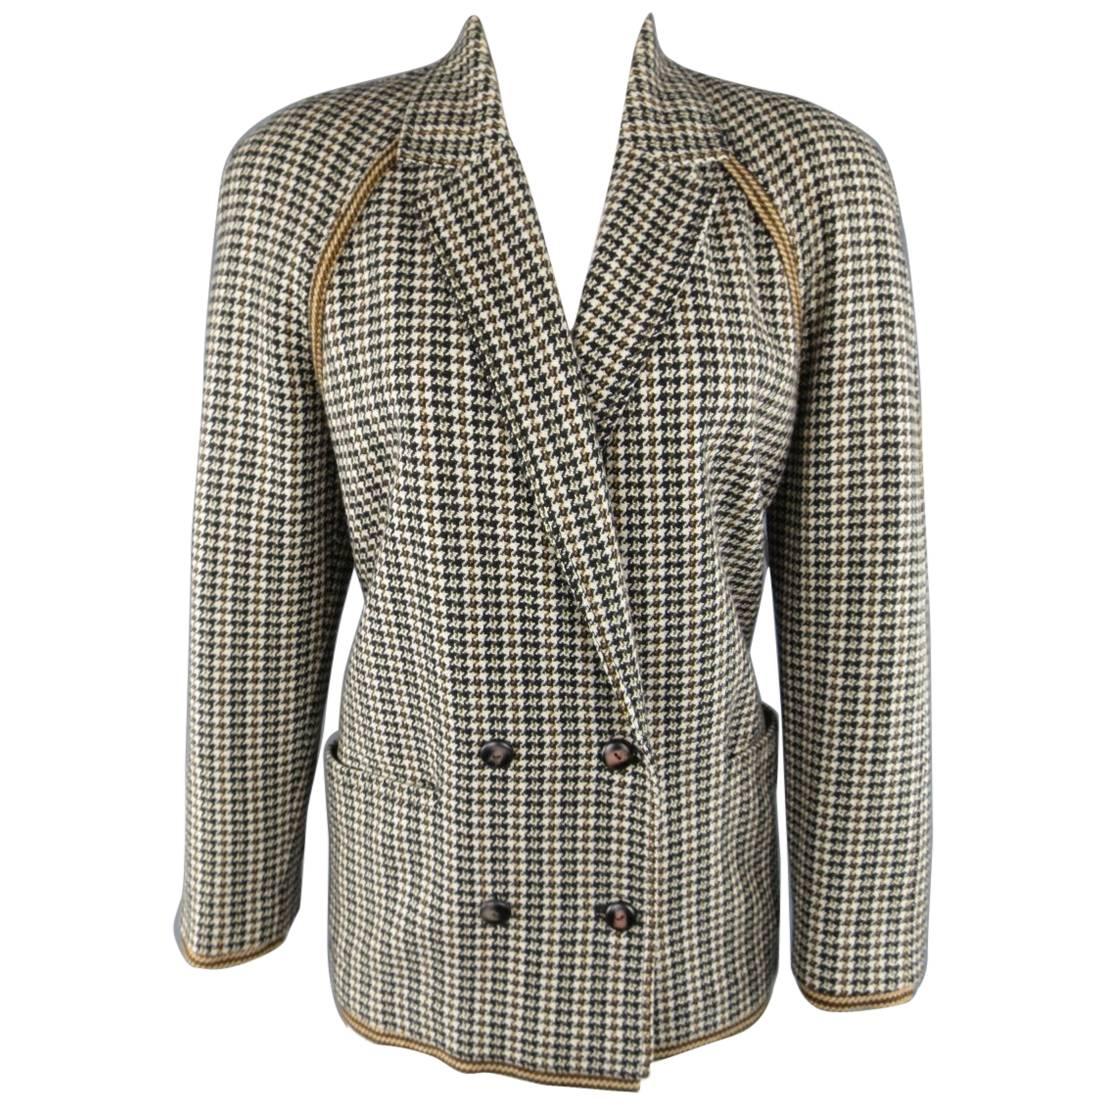 GIANNI VERSACE 1980s Size 8 Beige Houndstooth Cashmere Double Breasted Jacket